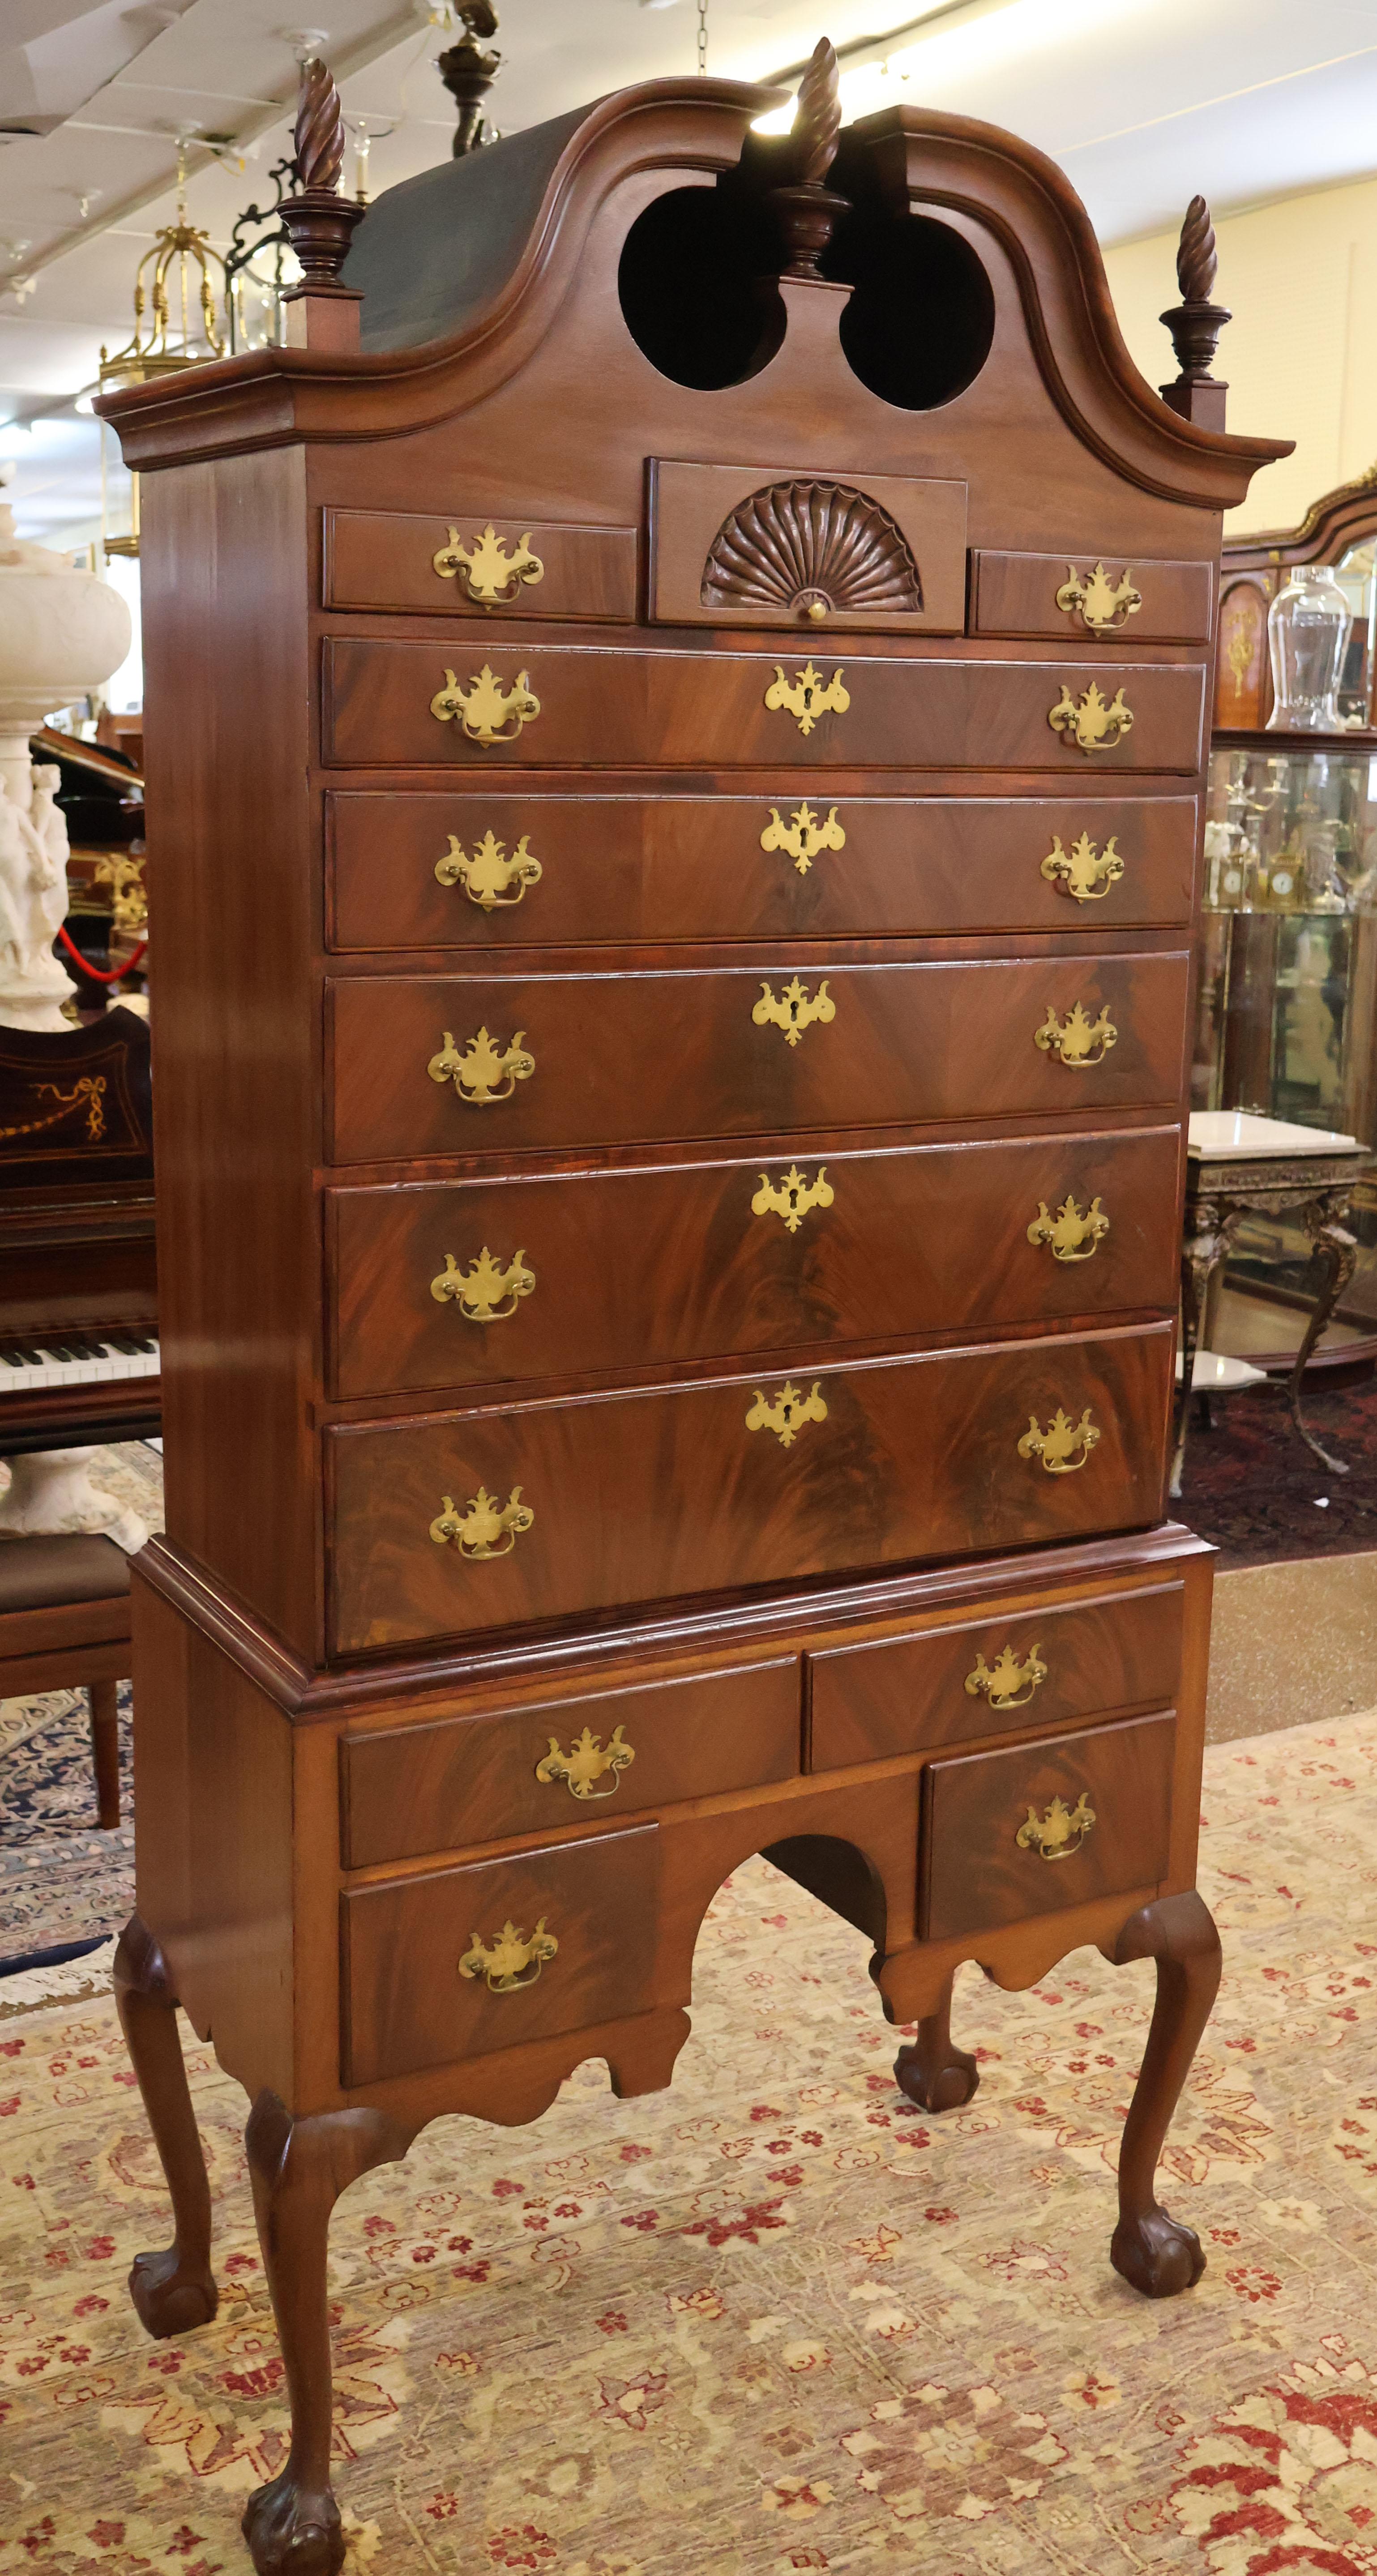 19th Century American Mahogany Chippendale Bonnet Top High Chest Highboy In Good Condition For Sale In Long Branch, NJ